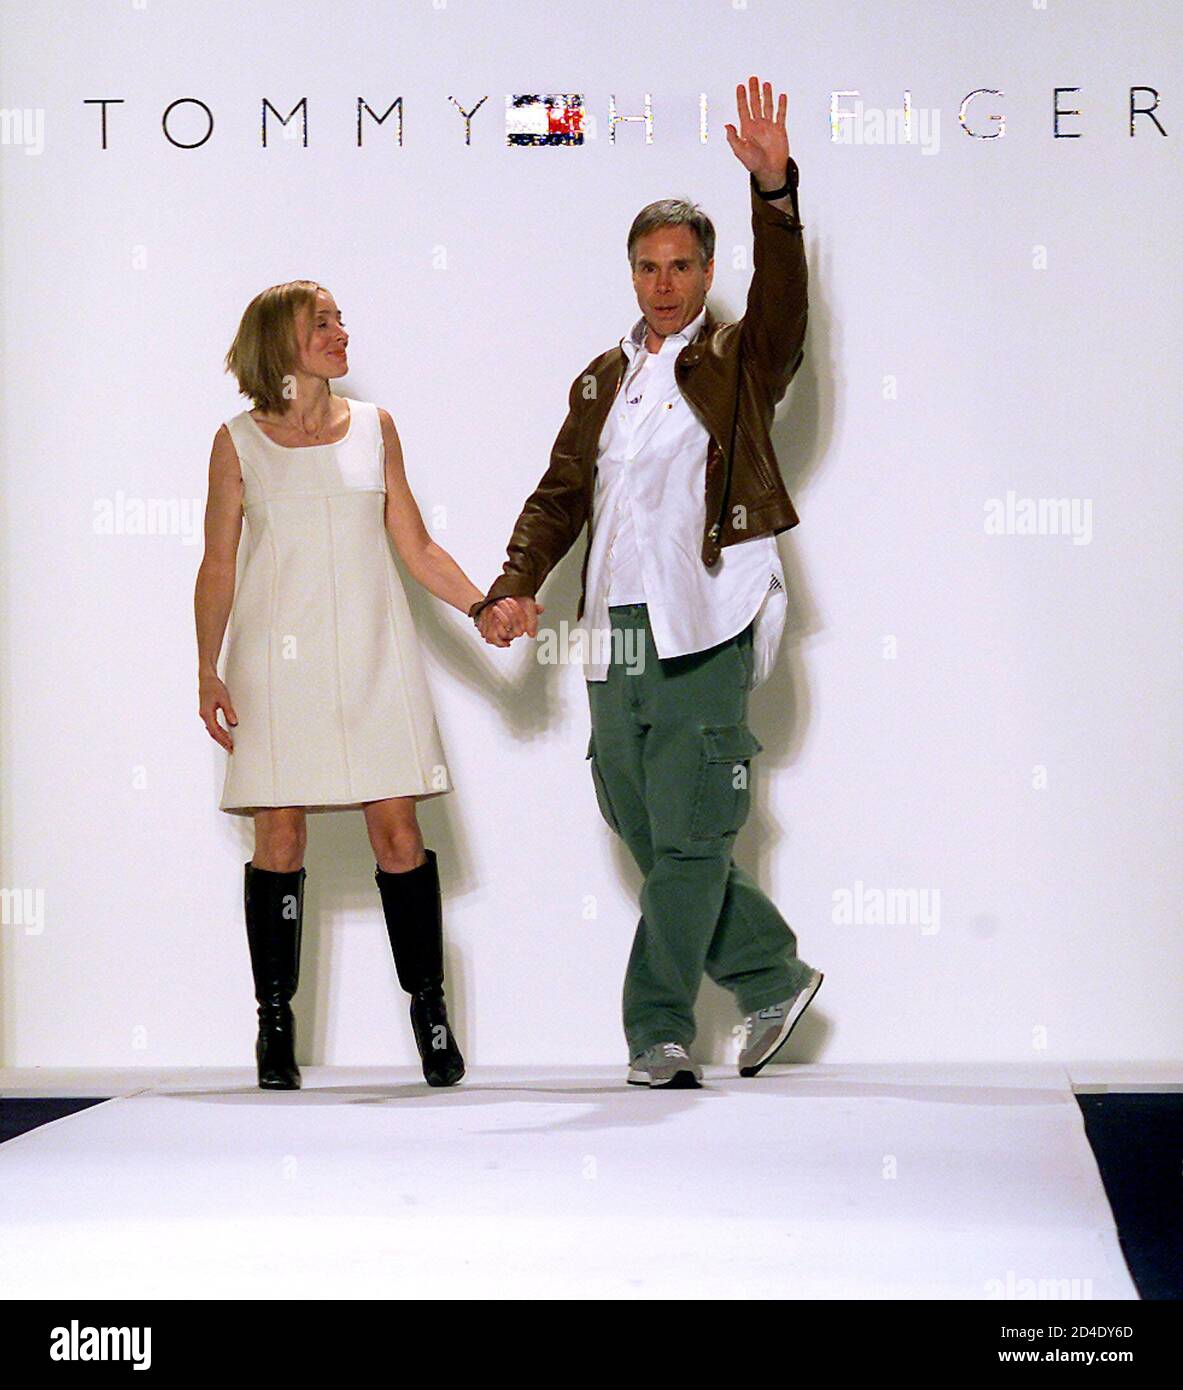 Designer Tommy Hilfiger waves to the audience as he and sister Ginny Hilfiger appear on the runway at the conclusion of presentation of the Tommy Hilfiger Fall/Winter 2002 Collection